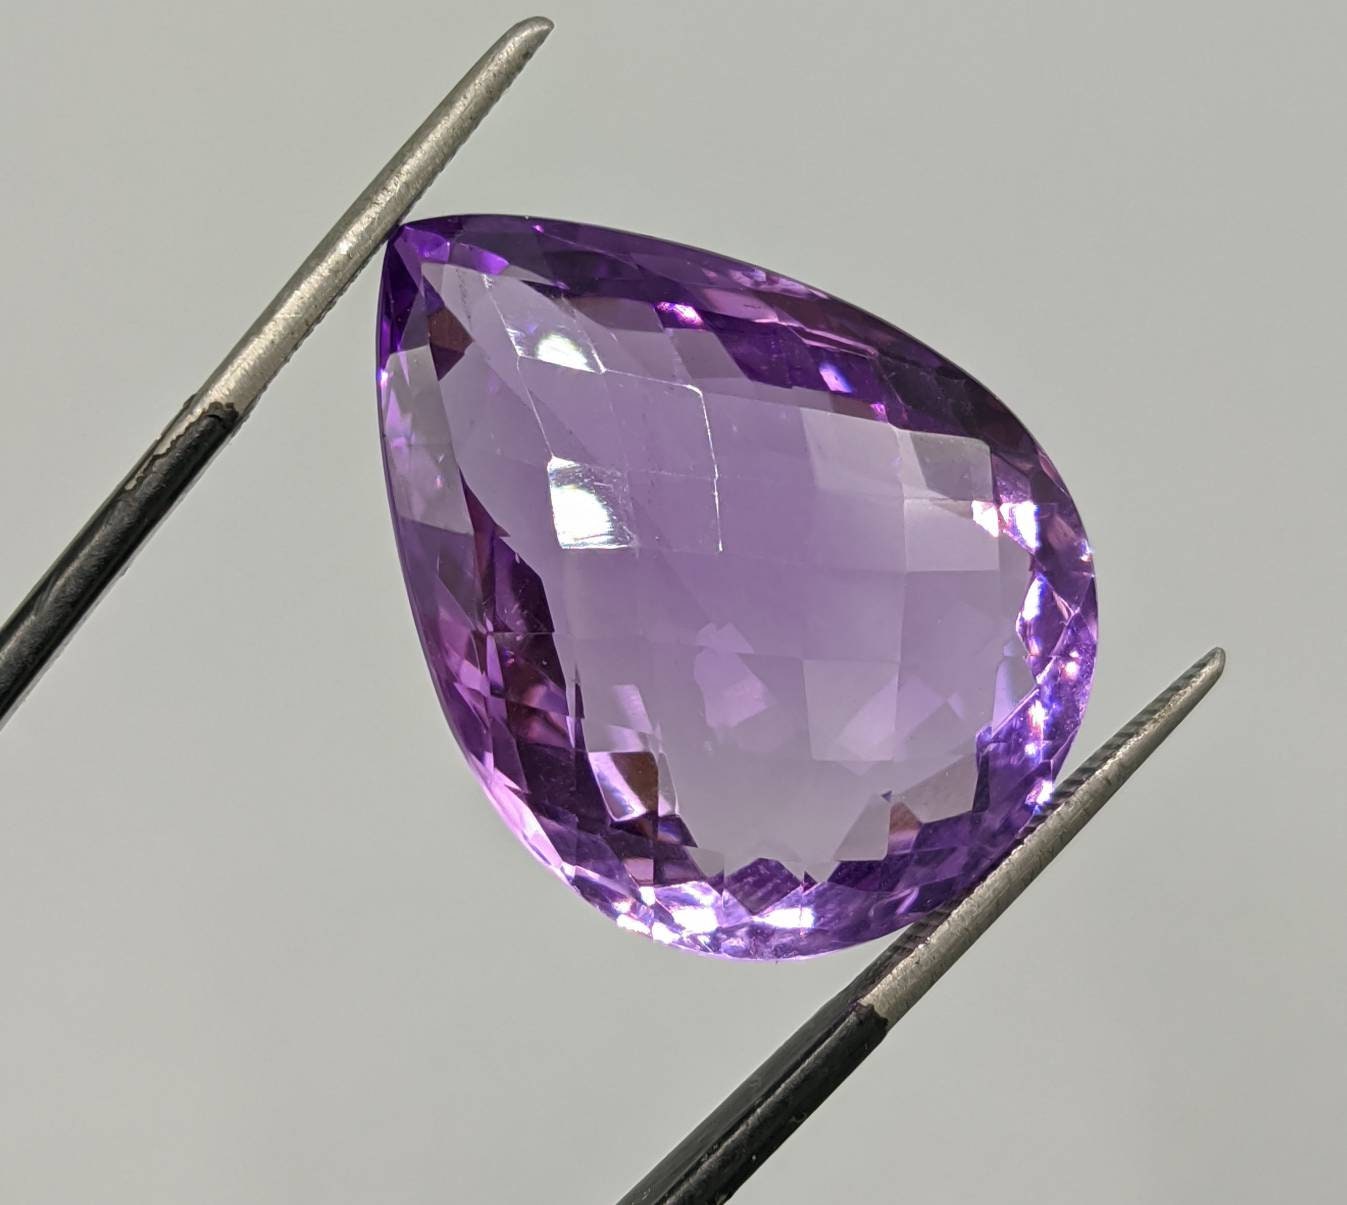 ARSAA GEMS AND MINERALSA natural 26 carats eye clean clarity deep purple color faceted checkerboard shape amethyst gem - Premium  from ARSAA GEMS AND MINERALS - Just $60.00! Shop now at ARSAA GEMS AND MINERALS